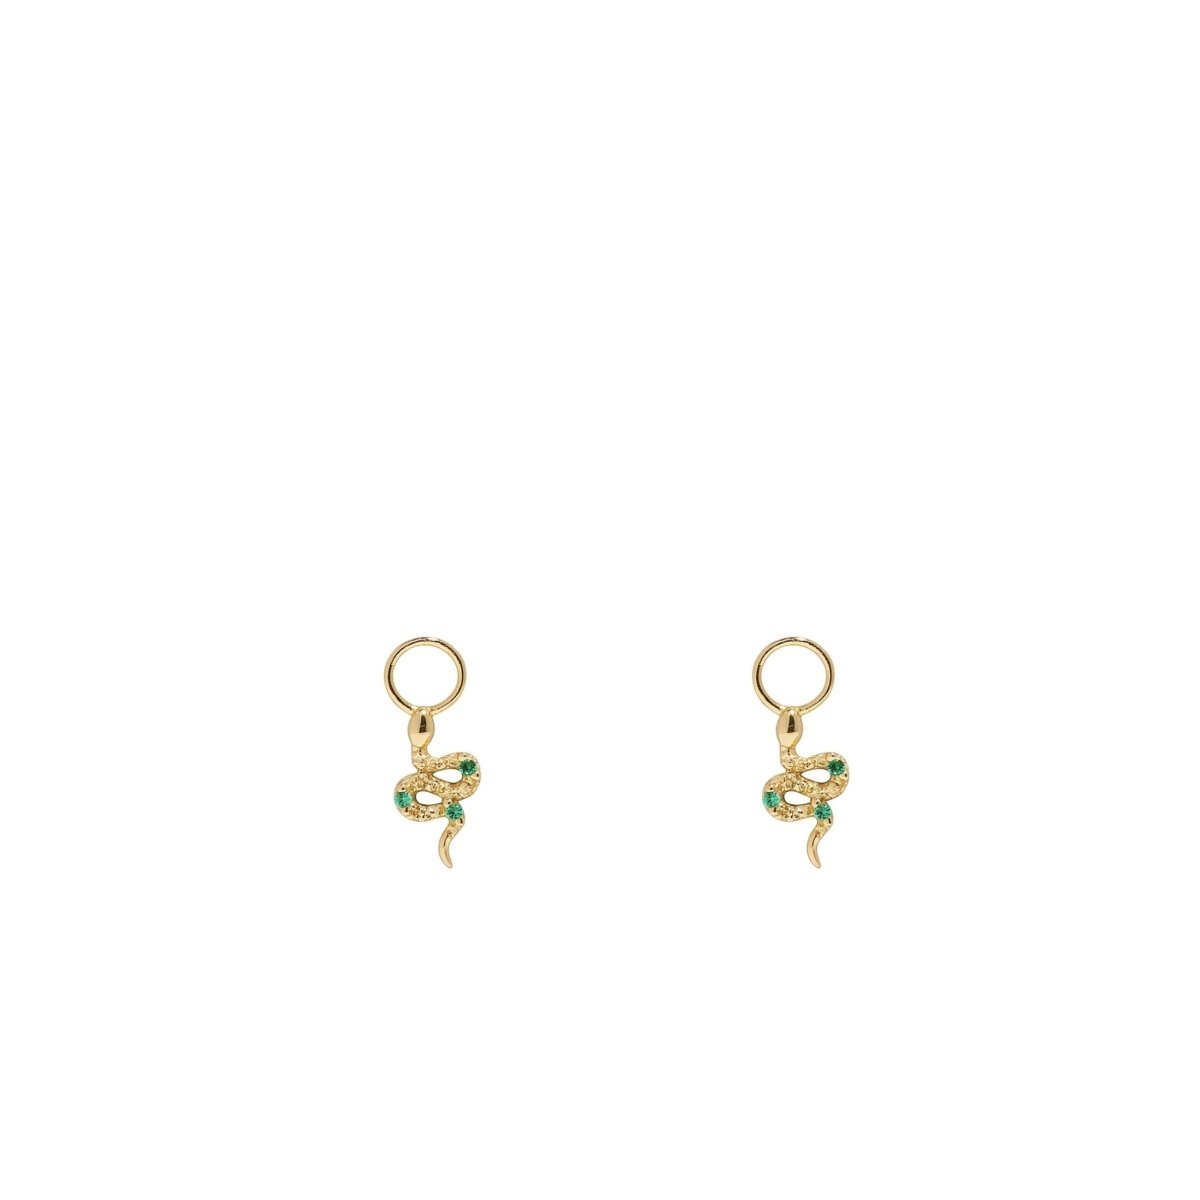 Alma earrings - five and two jewelry